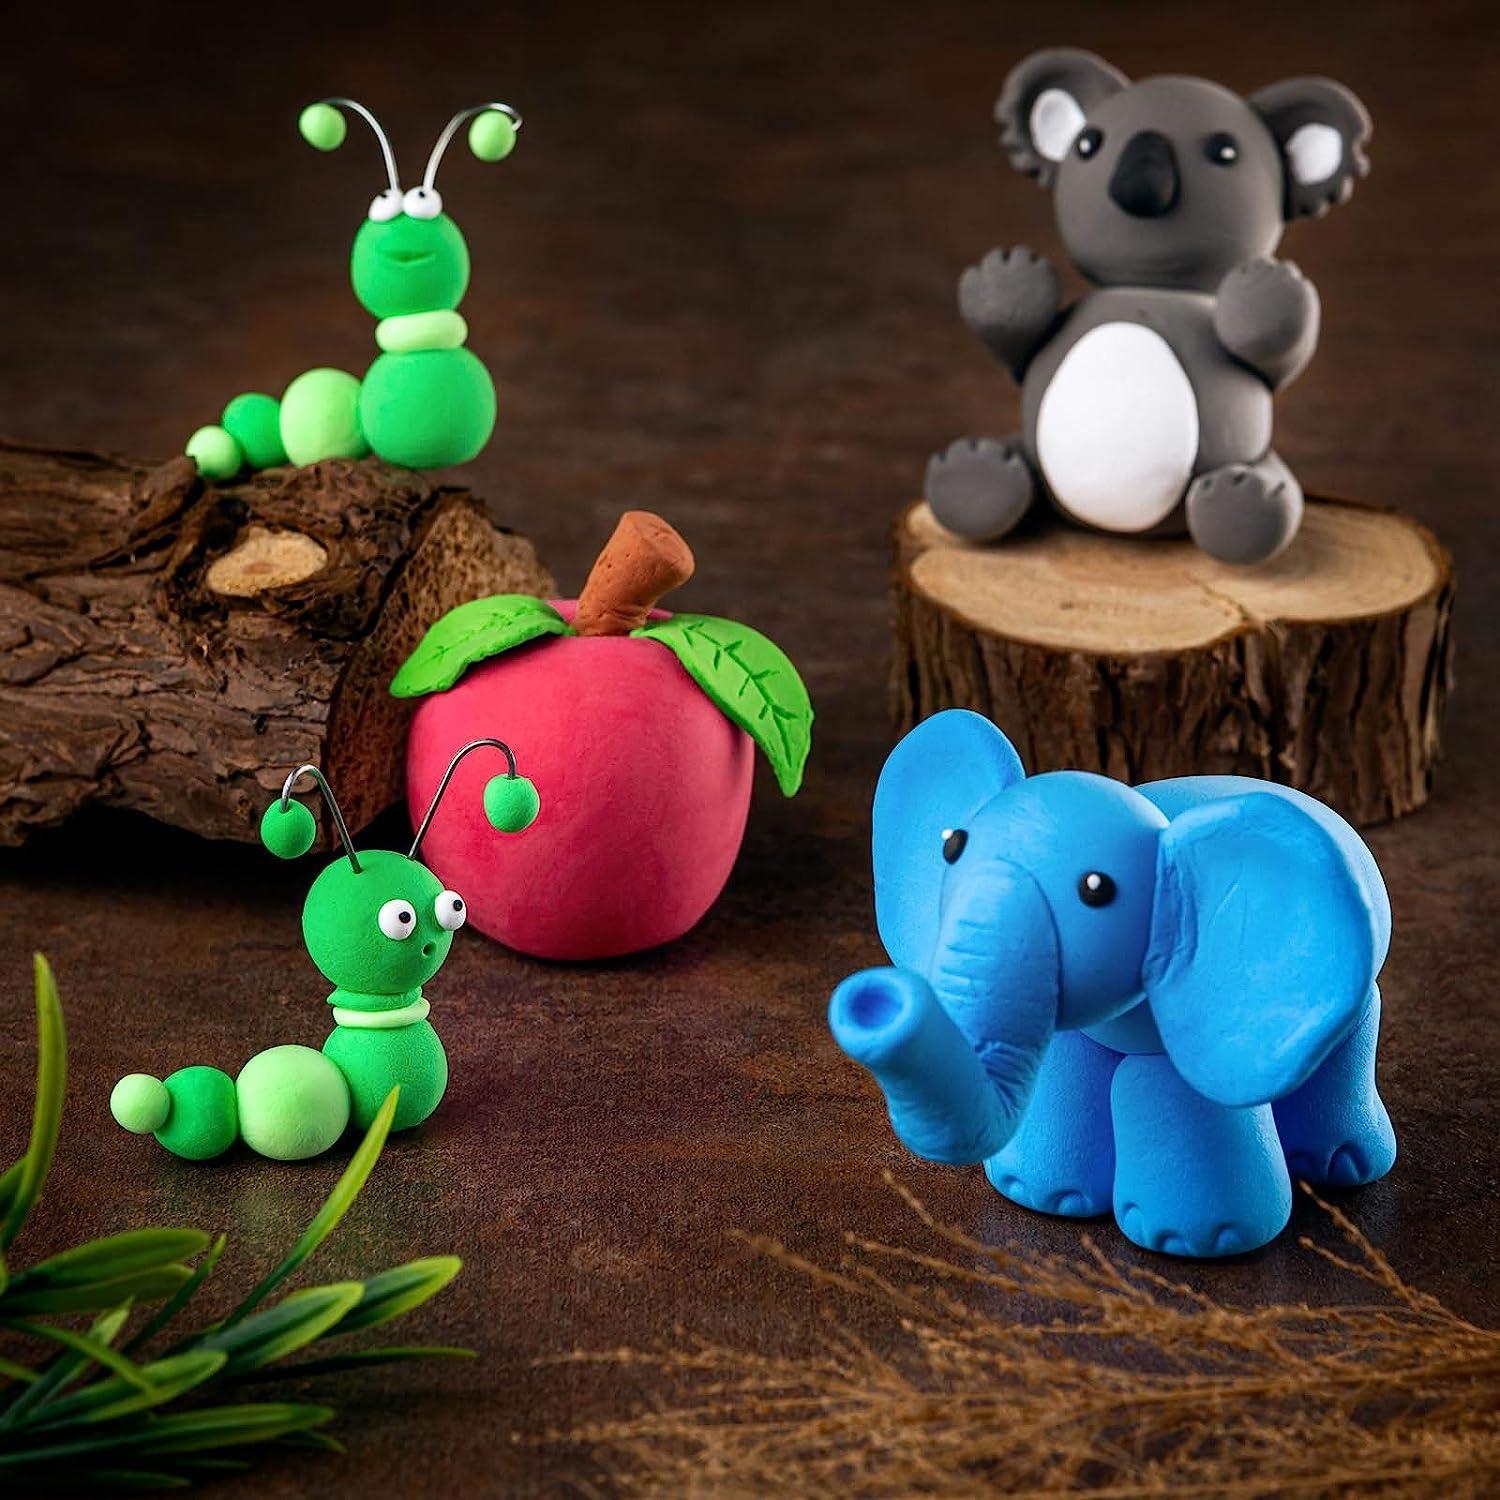 Book a fun foam clay sessions at our Crafty Monkey Studio